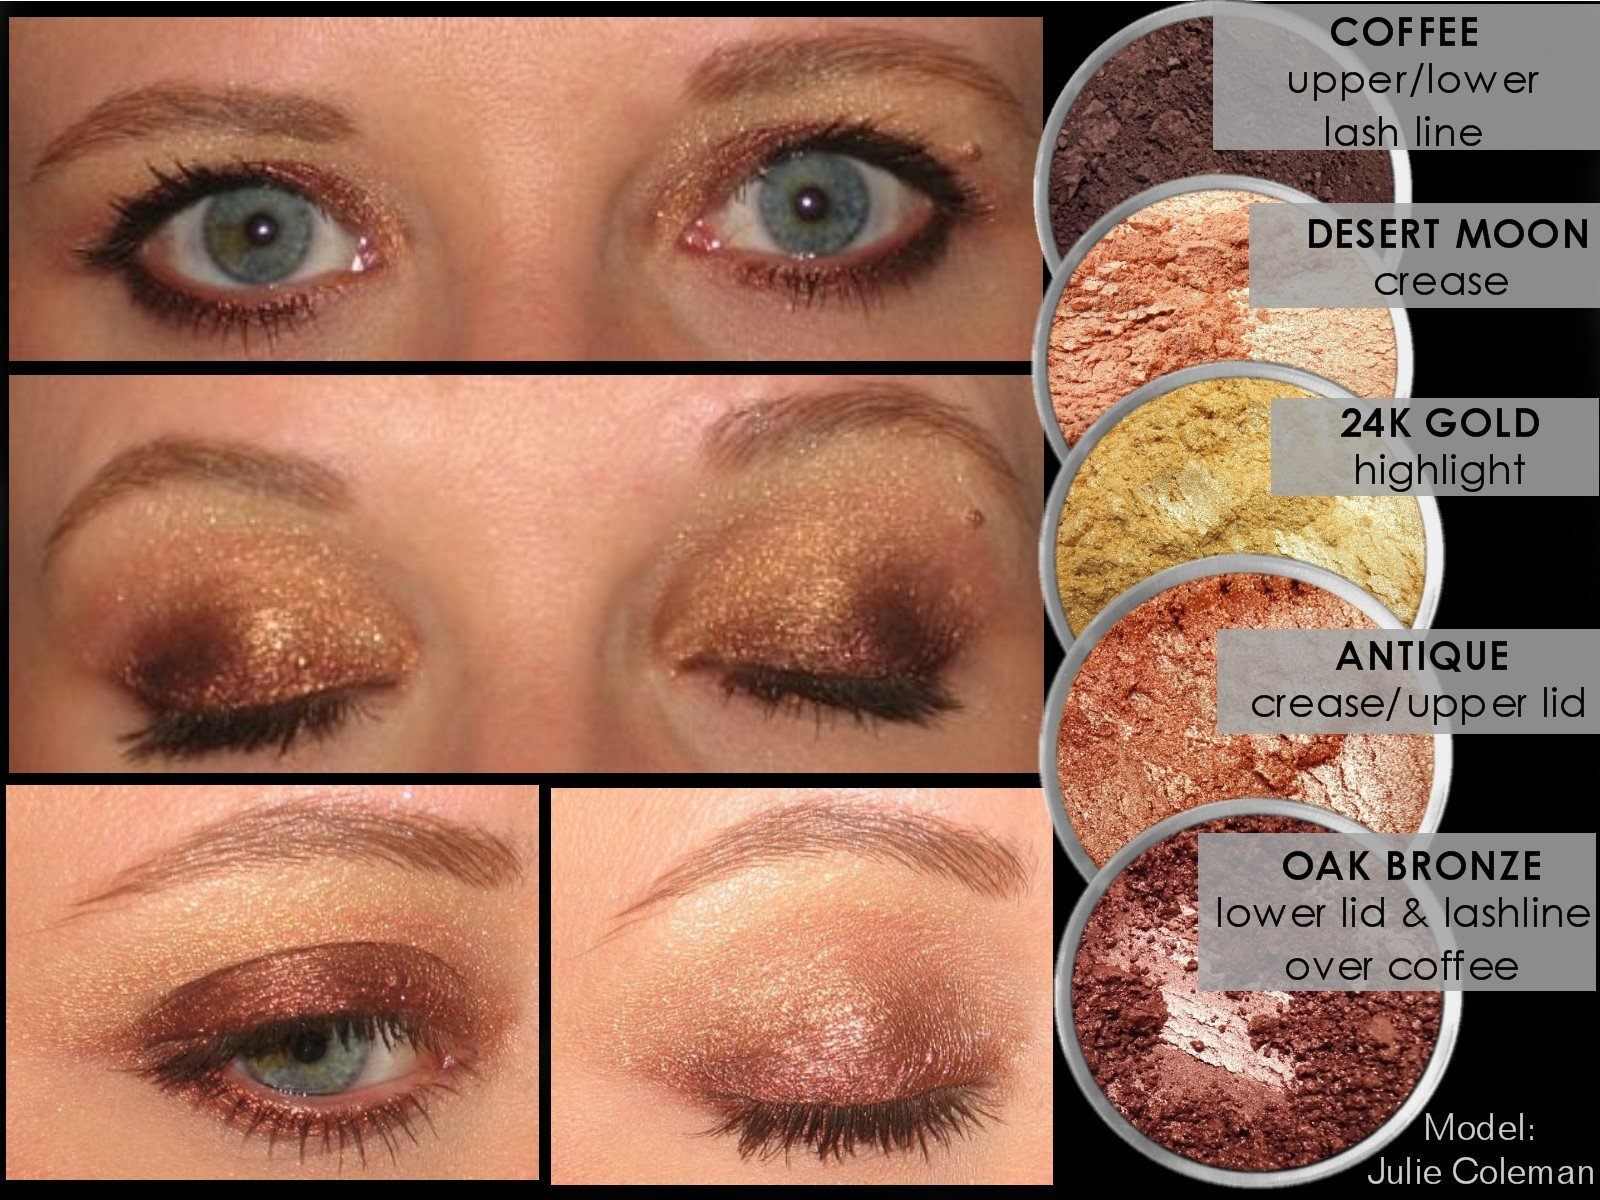 COFFEE Multi-Use Loose Mineral Powder Pigment Color Loose Mineral Multi-Use Colors M*A*D Minerals Makeup 